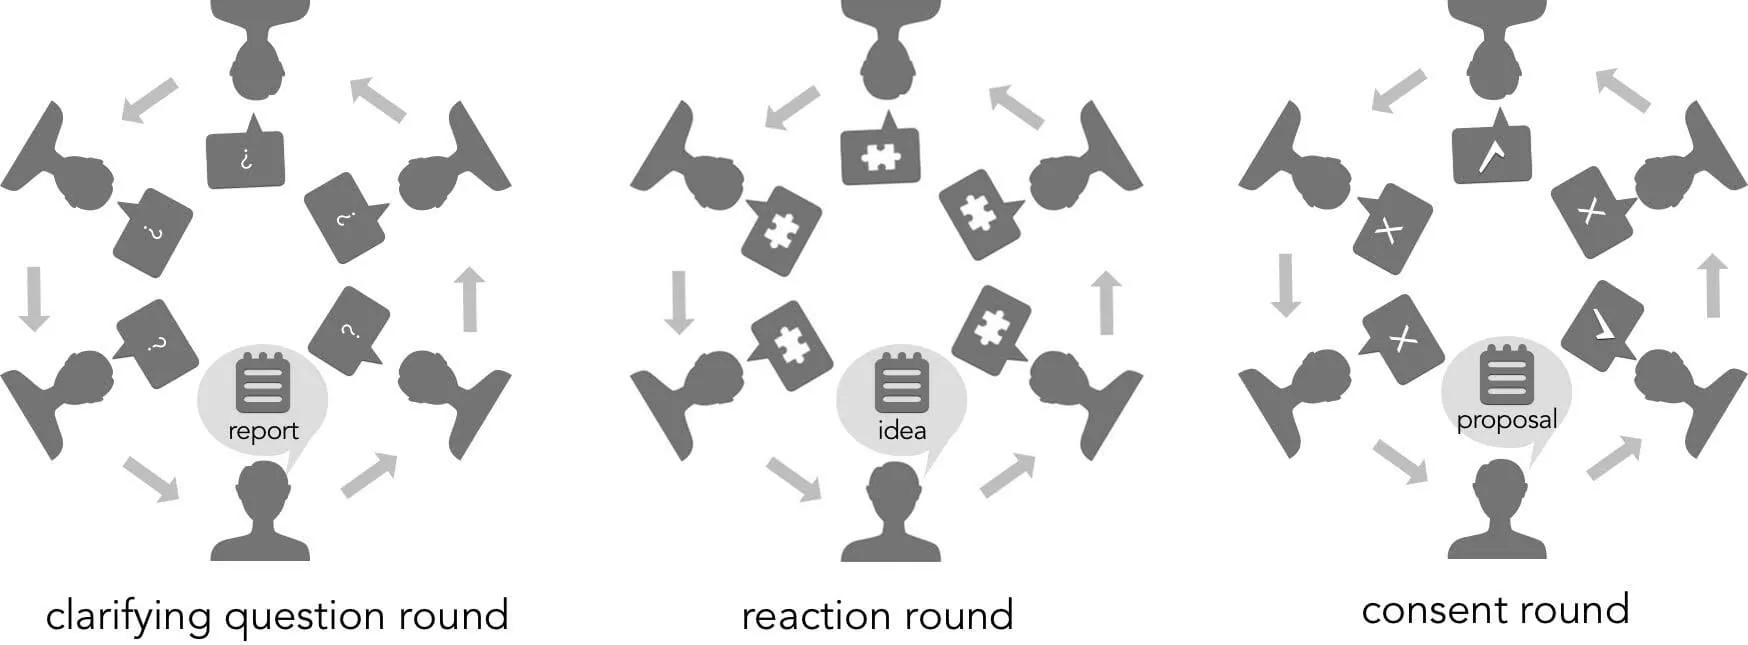 Sociocracy rounds: clarifying questions, reactions, consent.